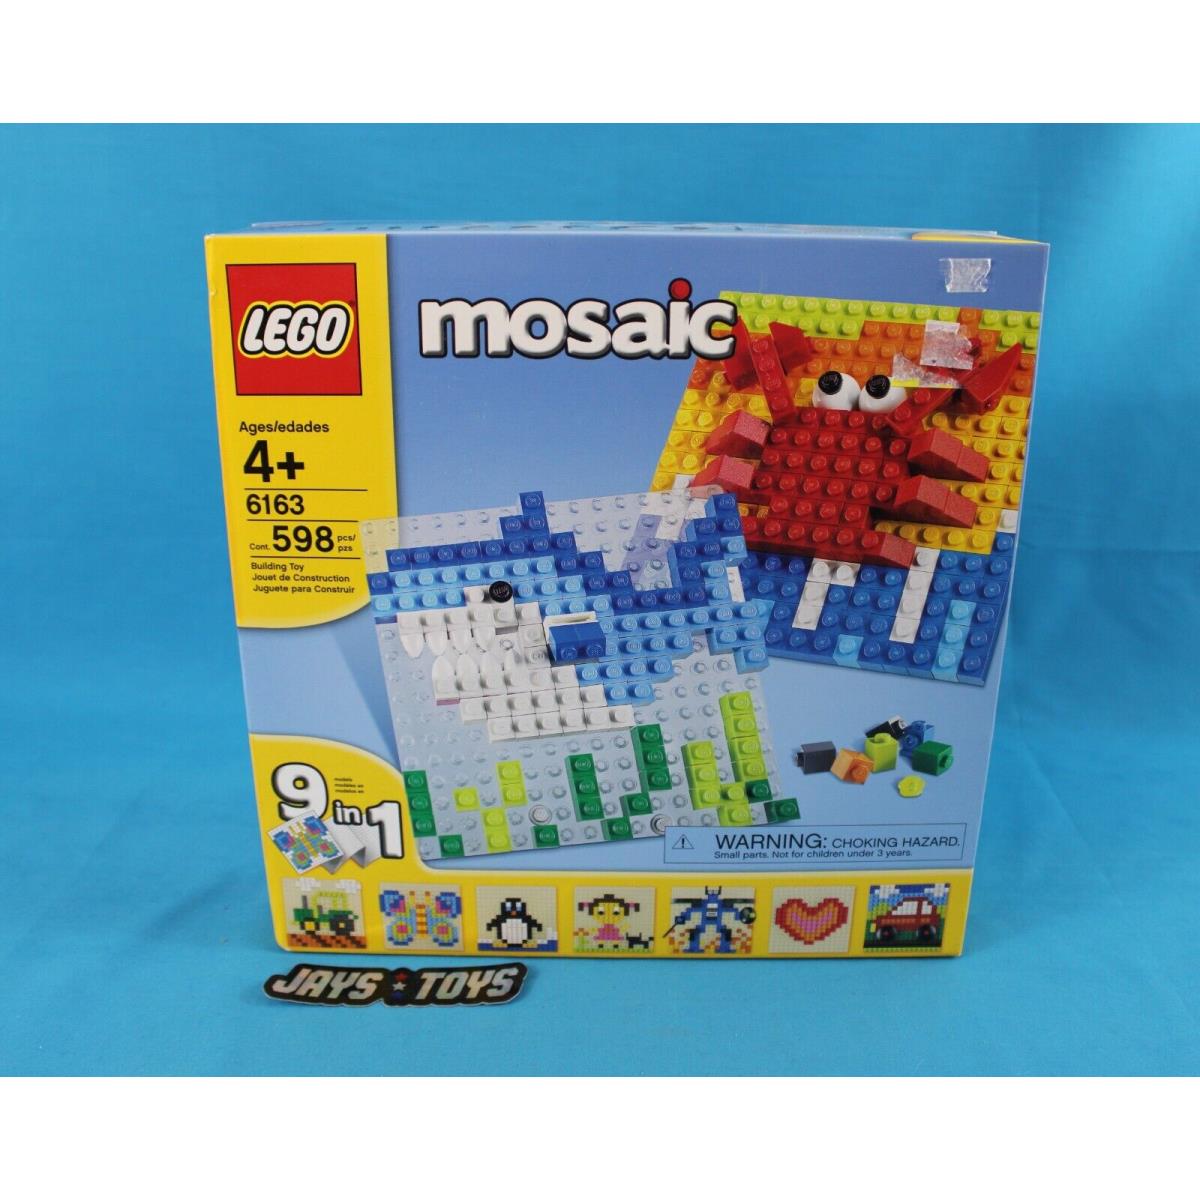 Lego 6163 Mosaic 9 in 1 Set 598 Pieces